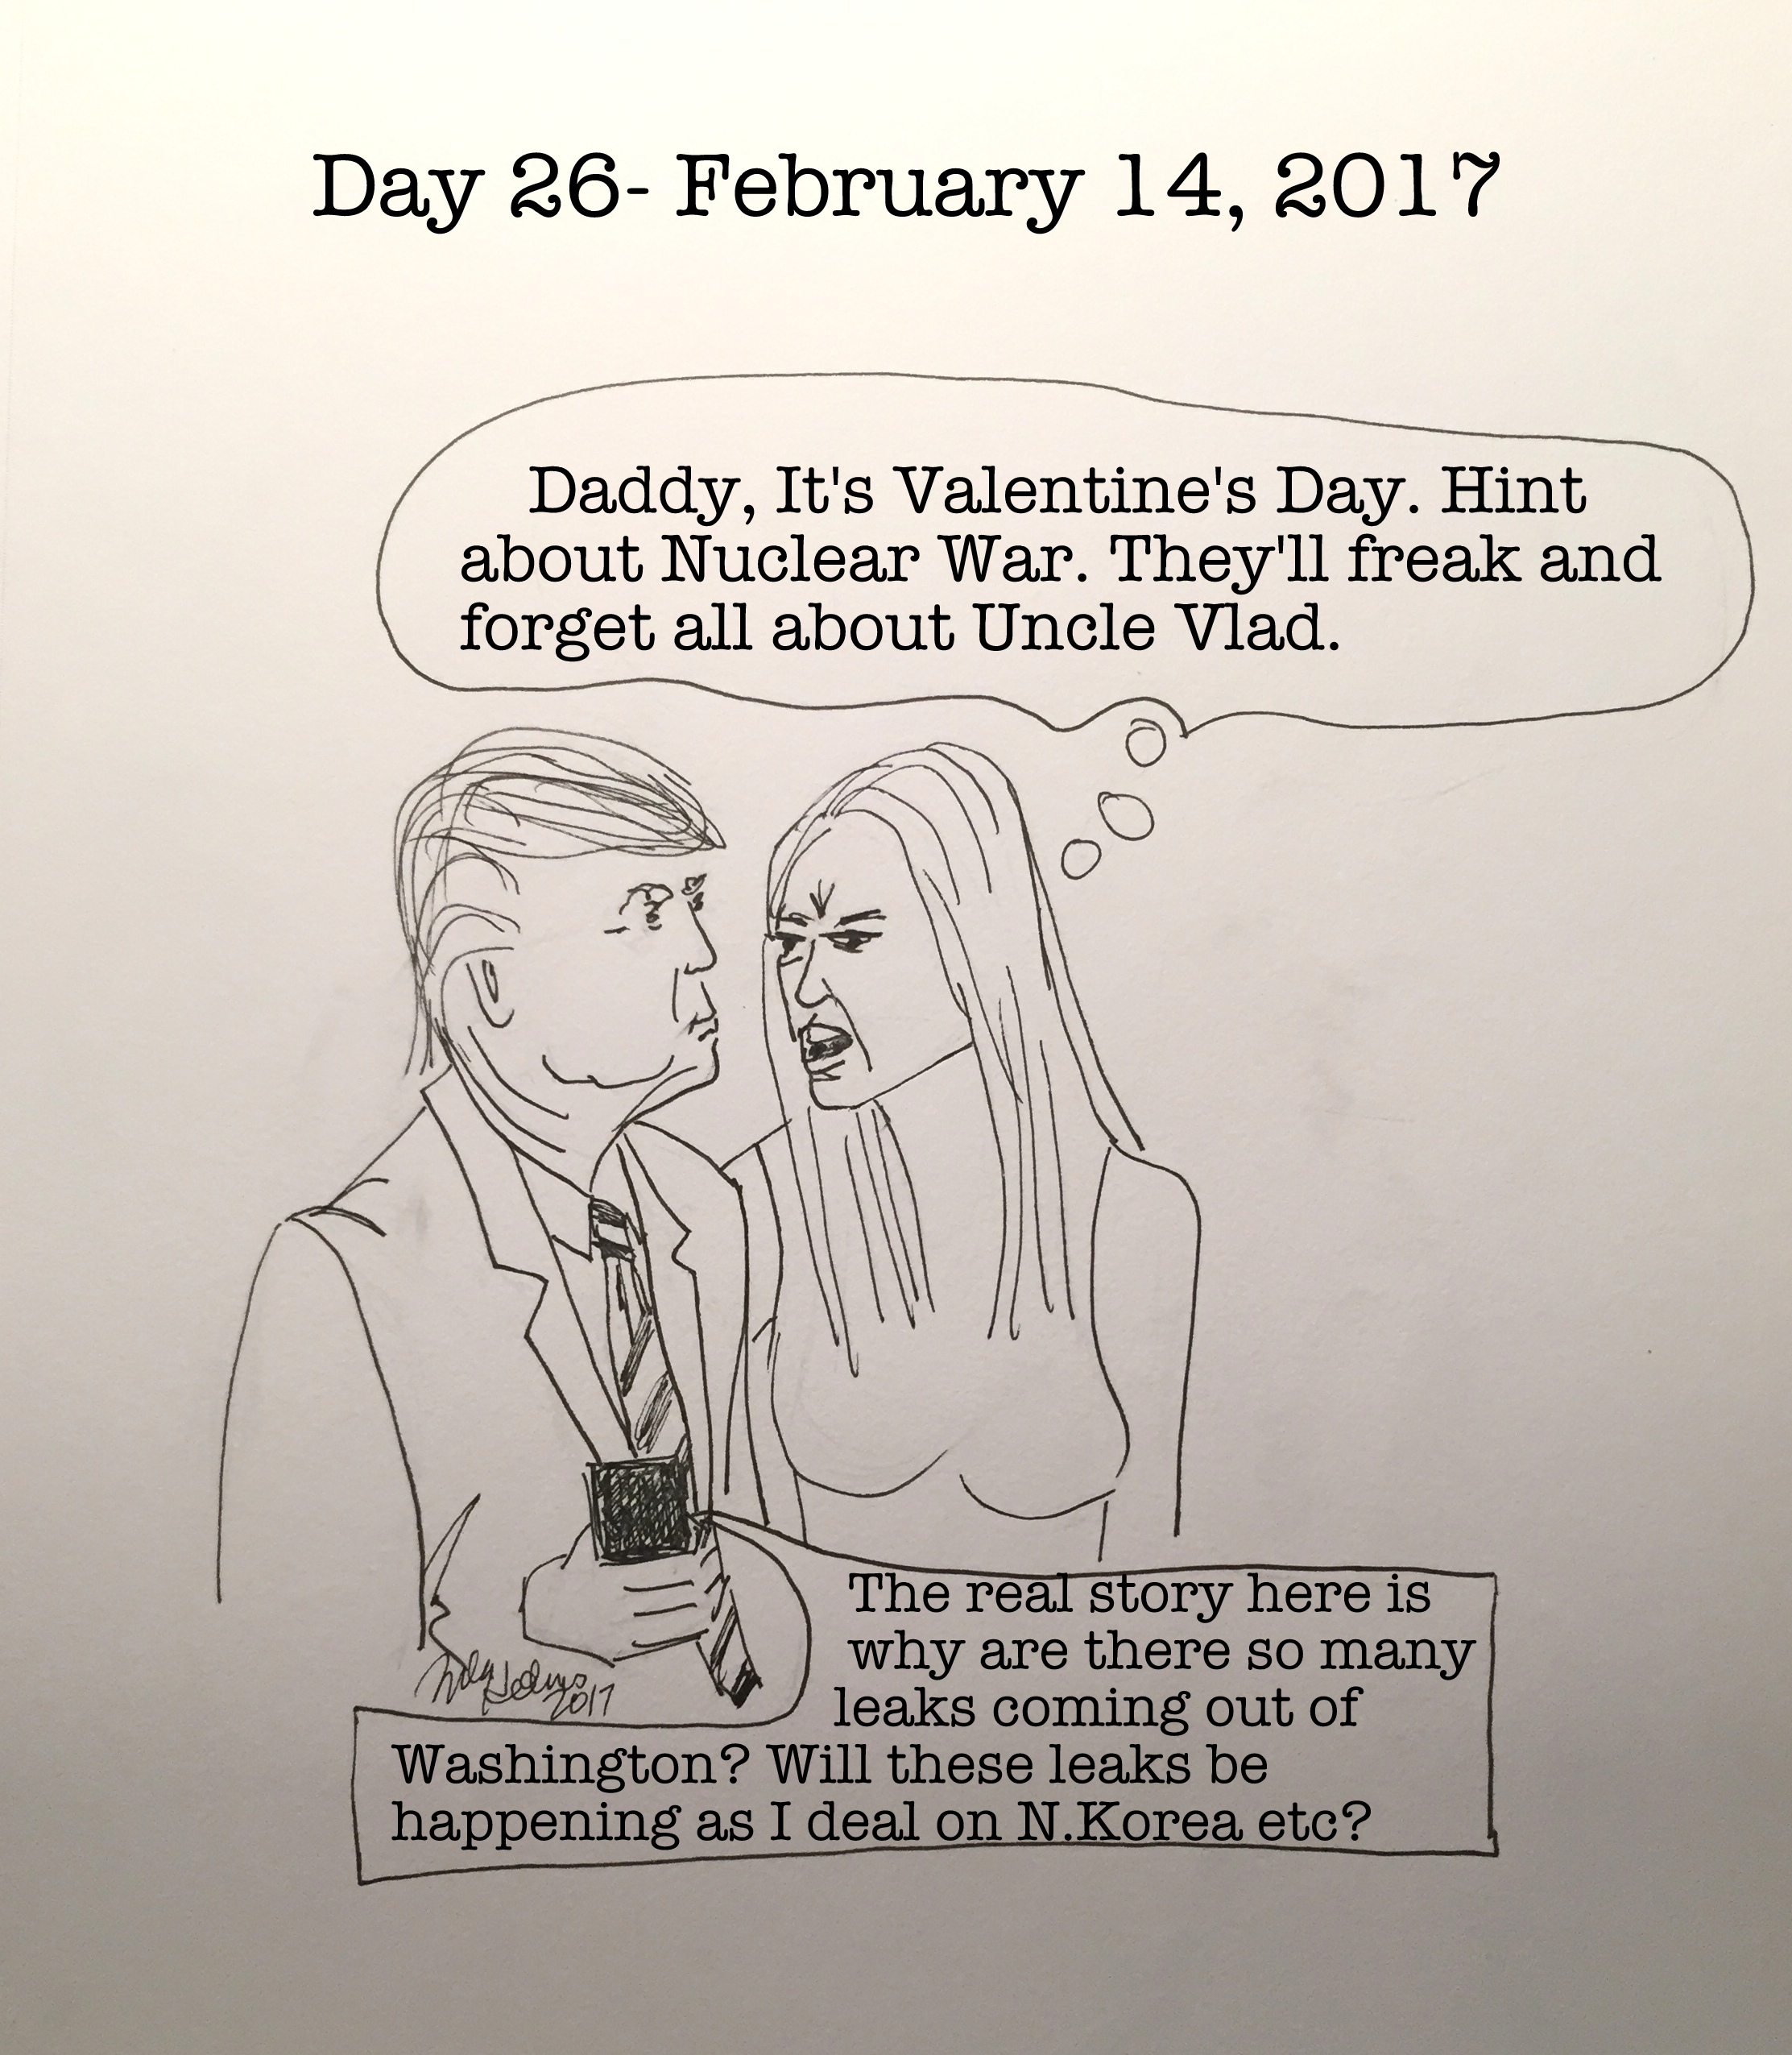 Day 26, February 14, 2017- Copyright 2017